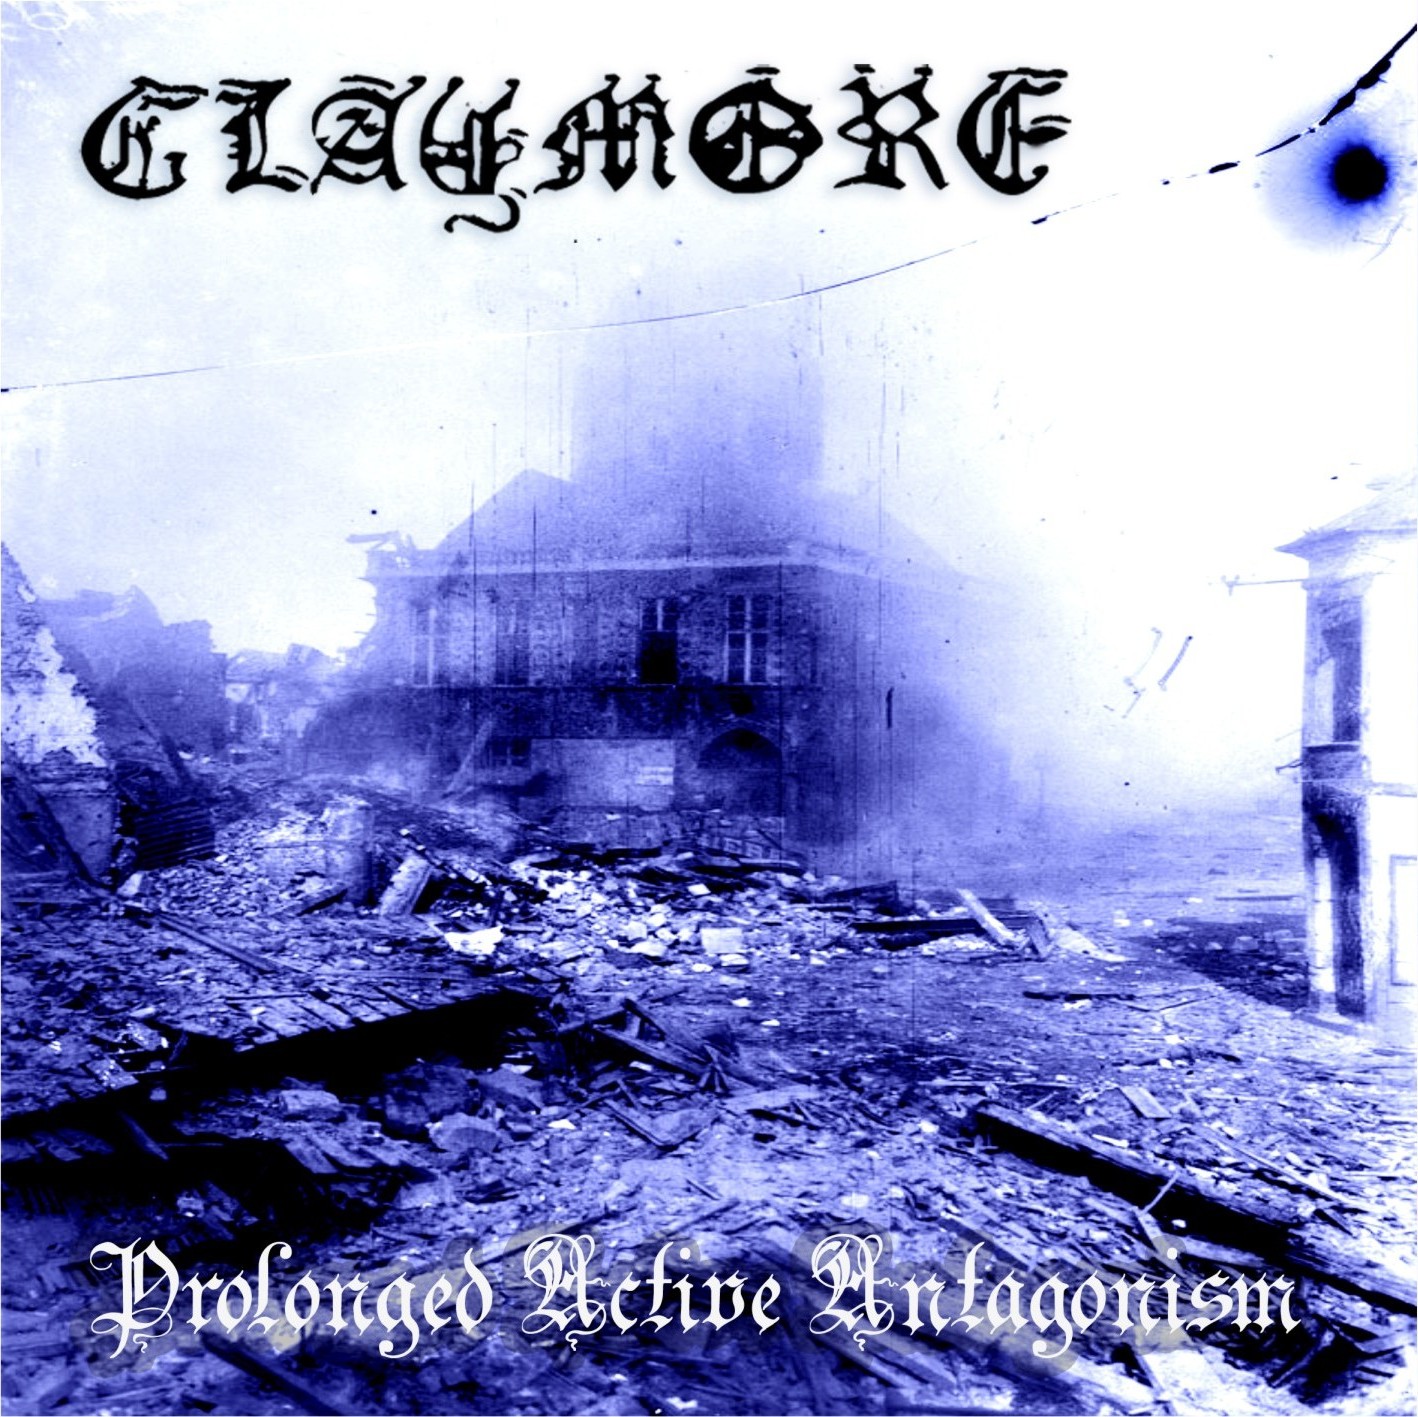 http://claymoreruse.files.wordpress.com/2009/05/claymore-prolonged-active-antagonism-cover.jpg